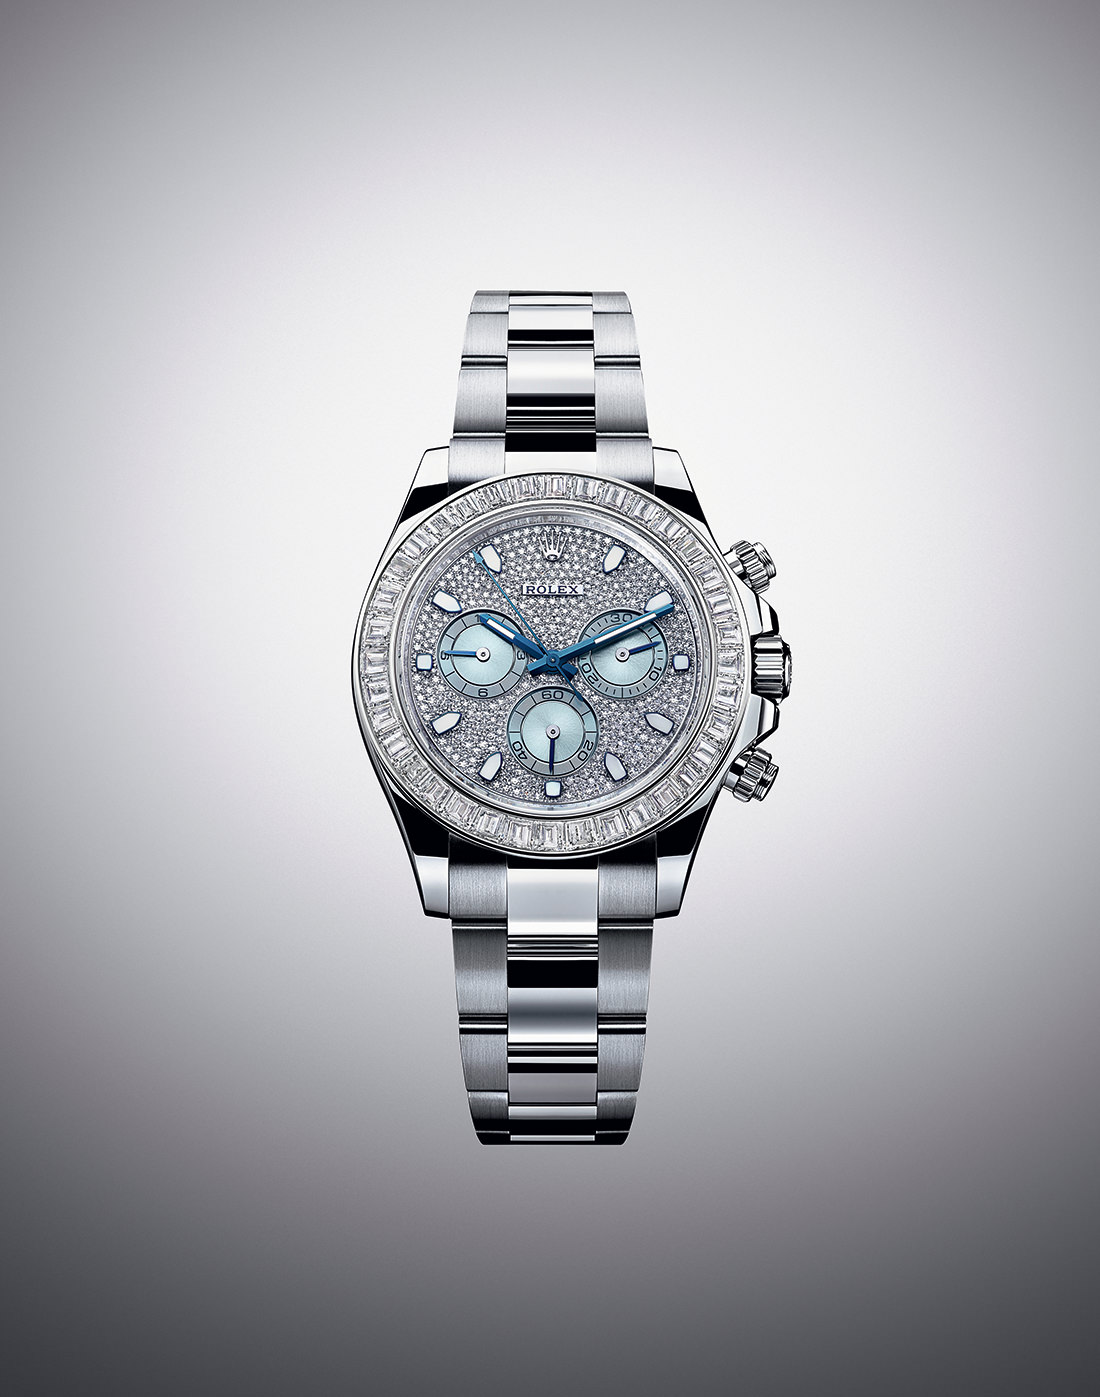 The Oyster Perpetual Cosmograph Daytona: a jewelled flare.